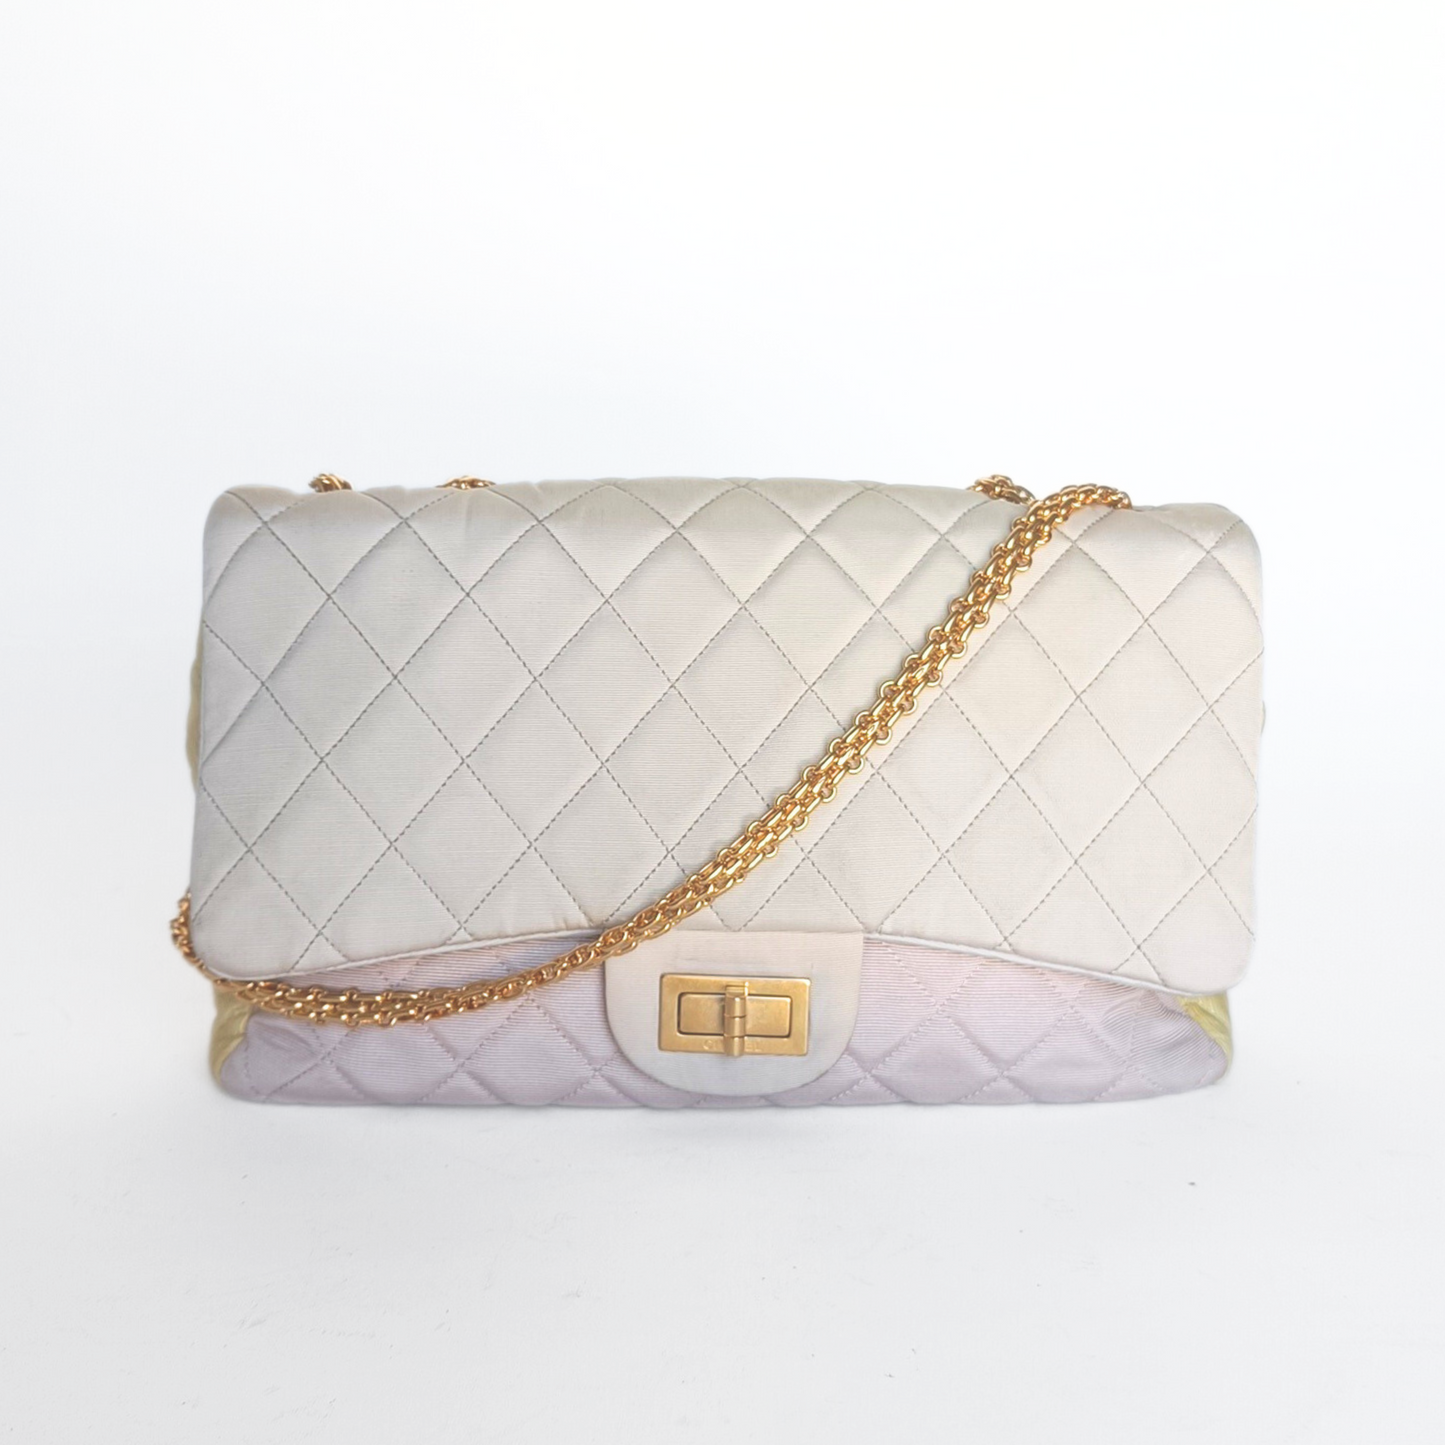 Chanel Chanel 2.55 Quilted Bag Pastel Nylon - Shoulder bags - Etoile Luxury Vintage